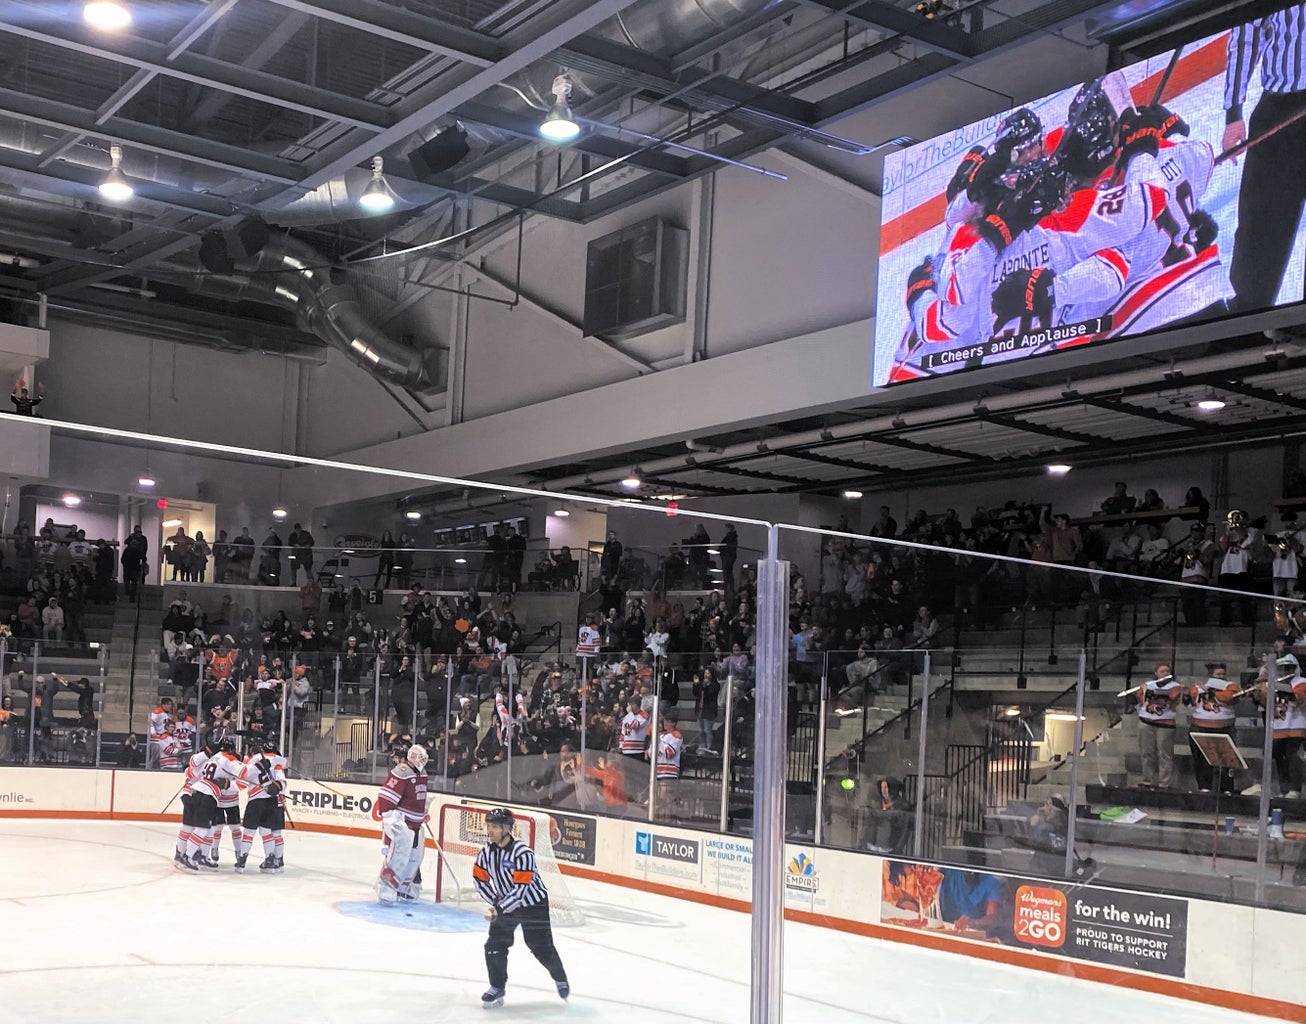 The RIT\'s Men Hockey team gather to hug and celebrate after scoring in a goal while the crowd cheers